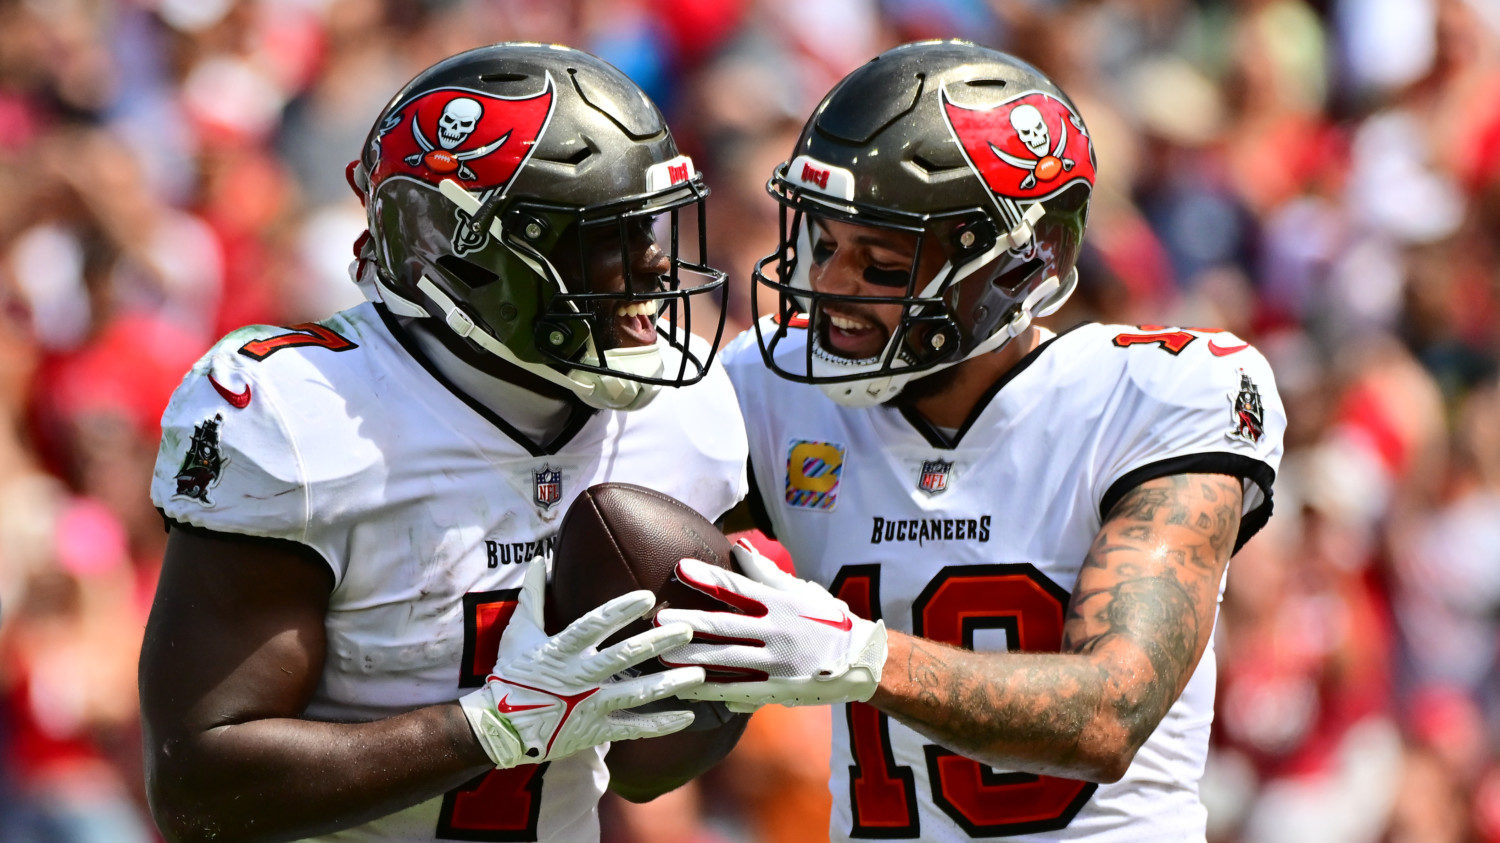 Ravens vs. Bucs Odds and Top Prop Bets & Parlays: NFL Week 8